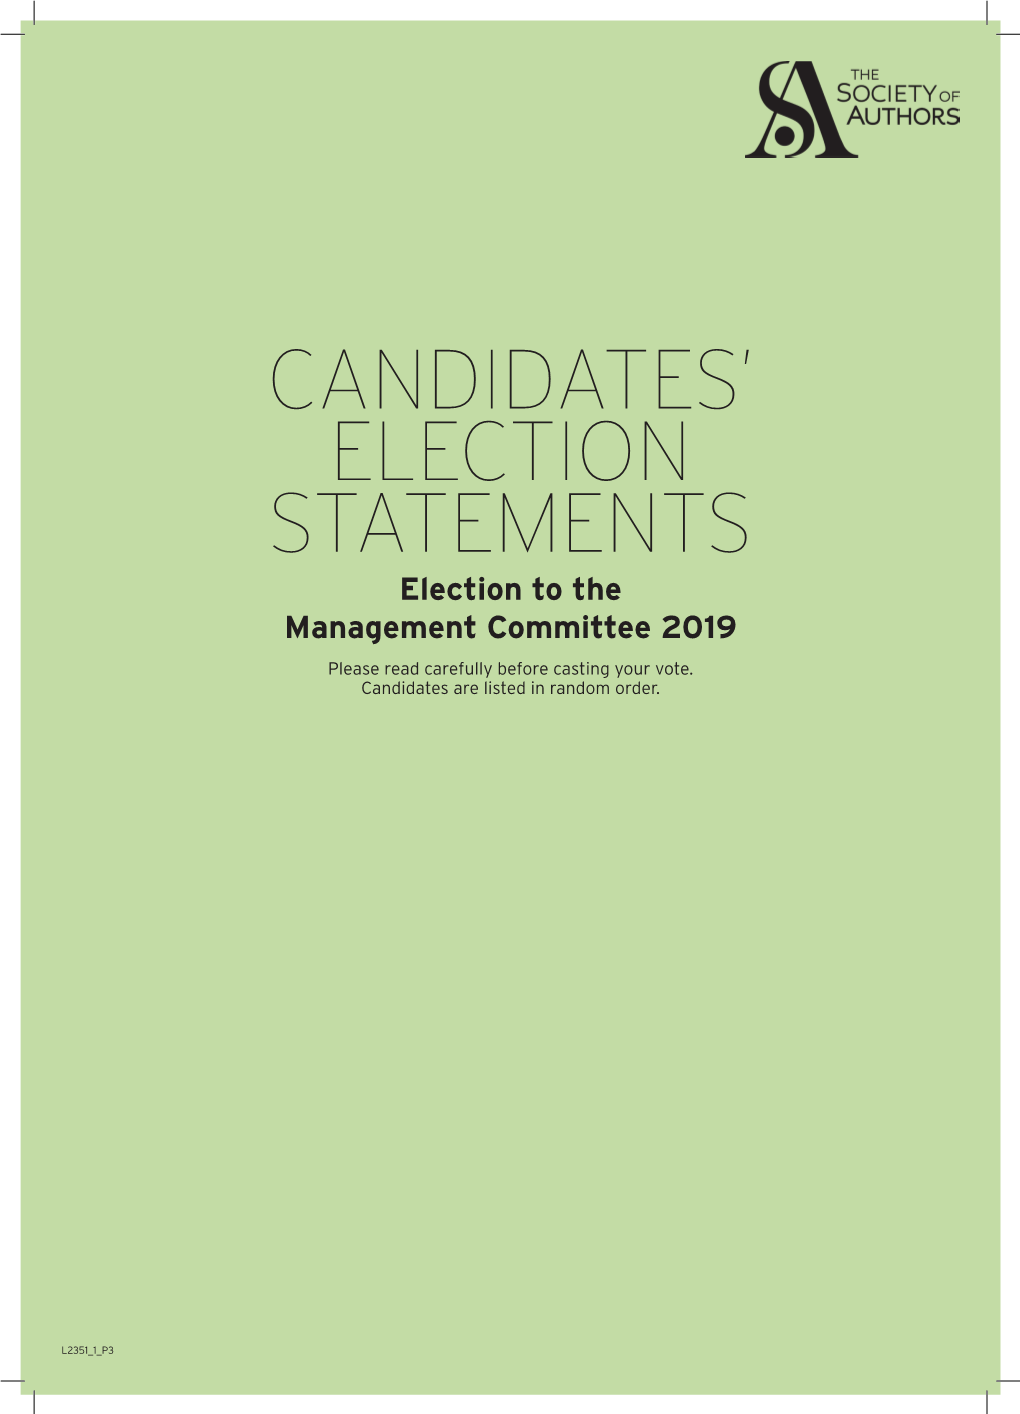 Candidates' Election Statements